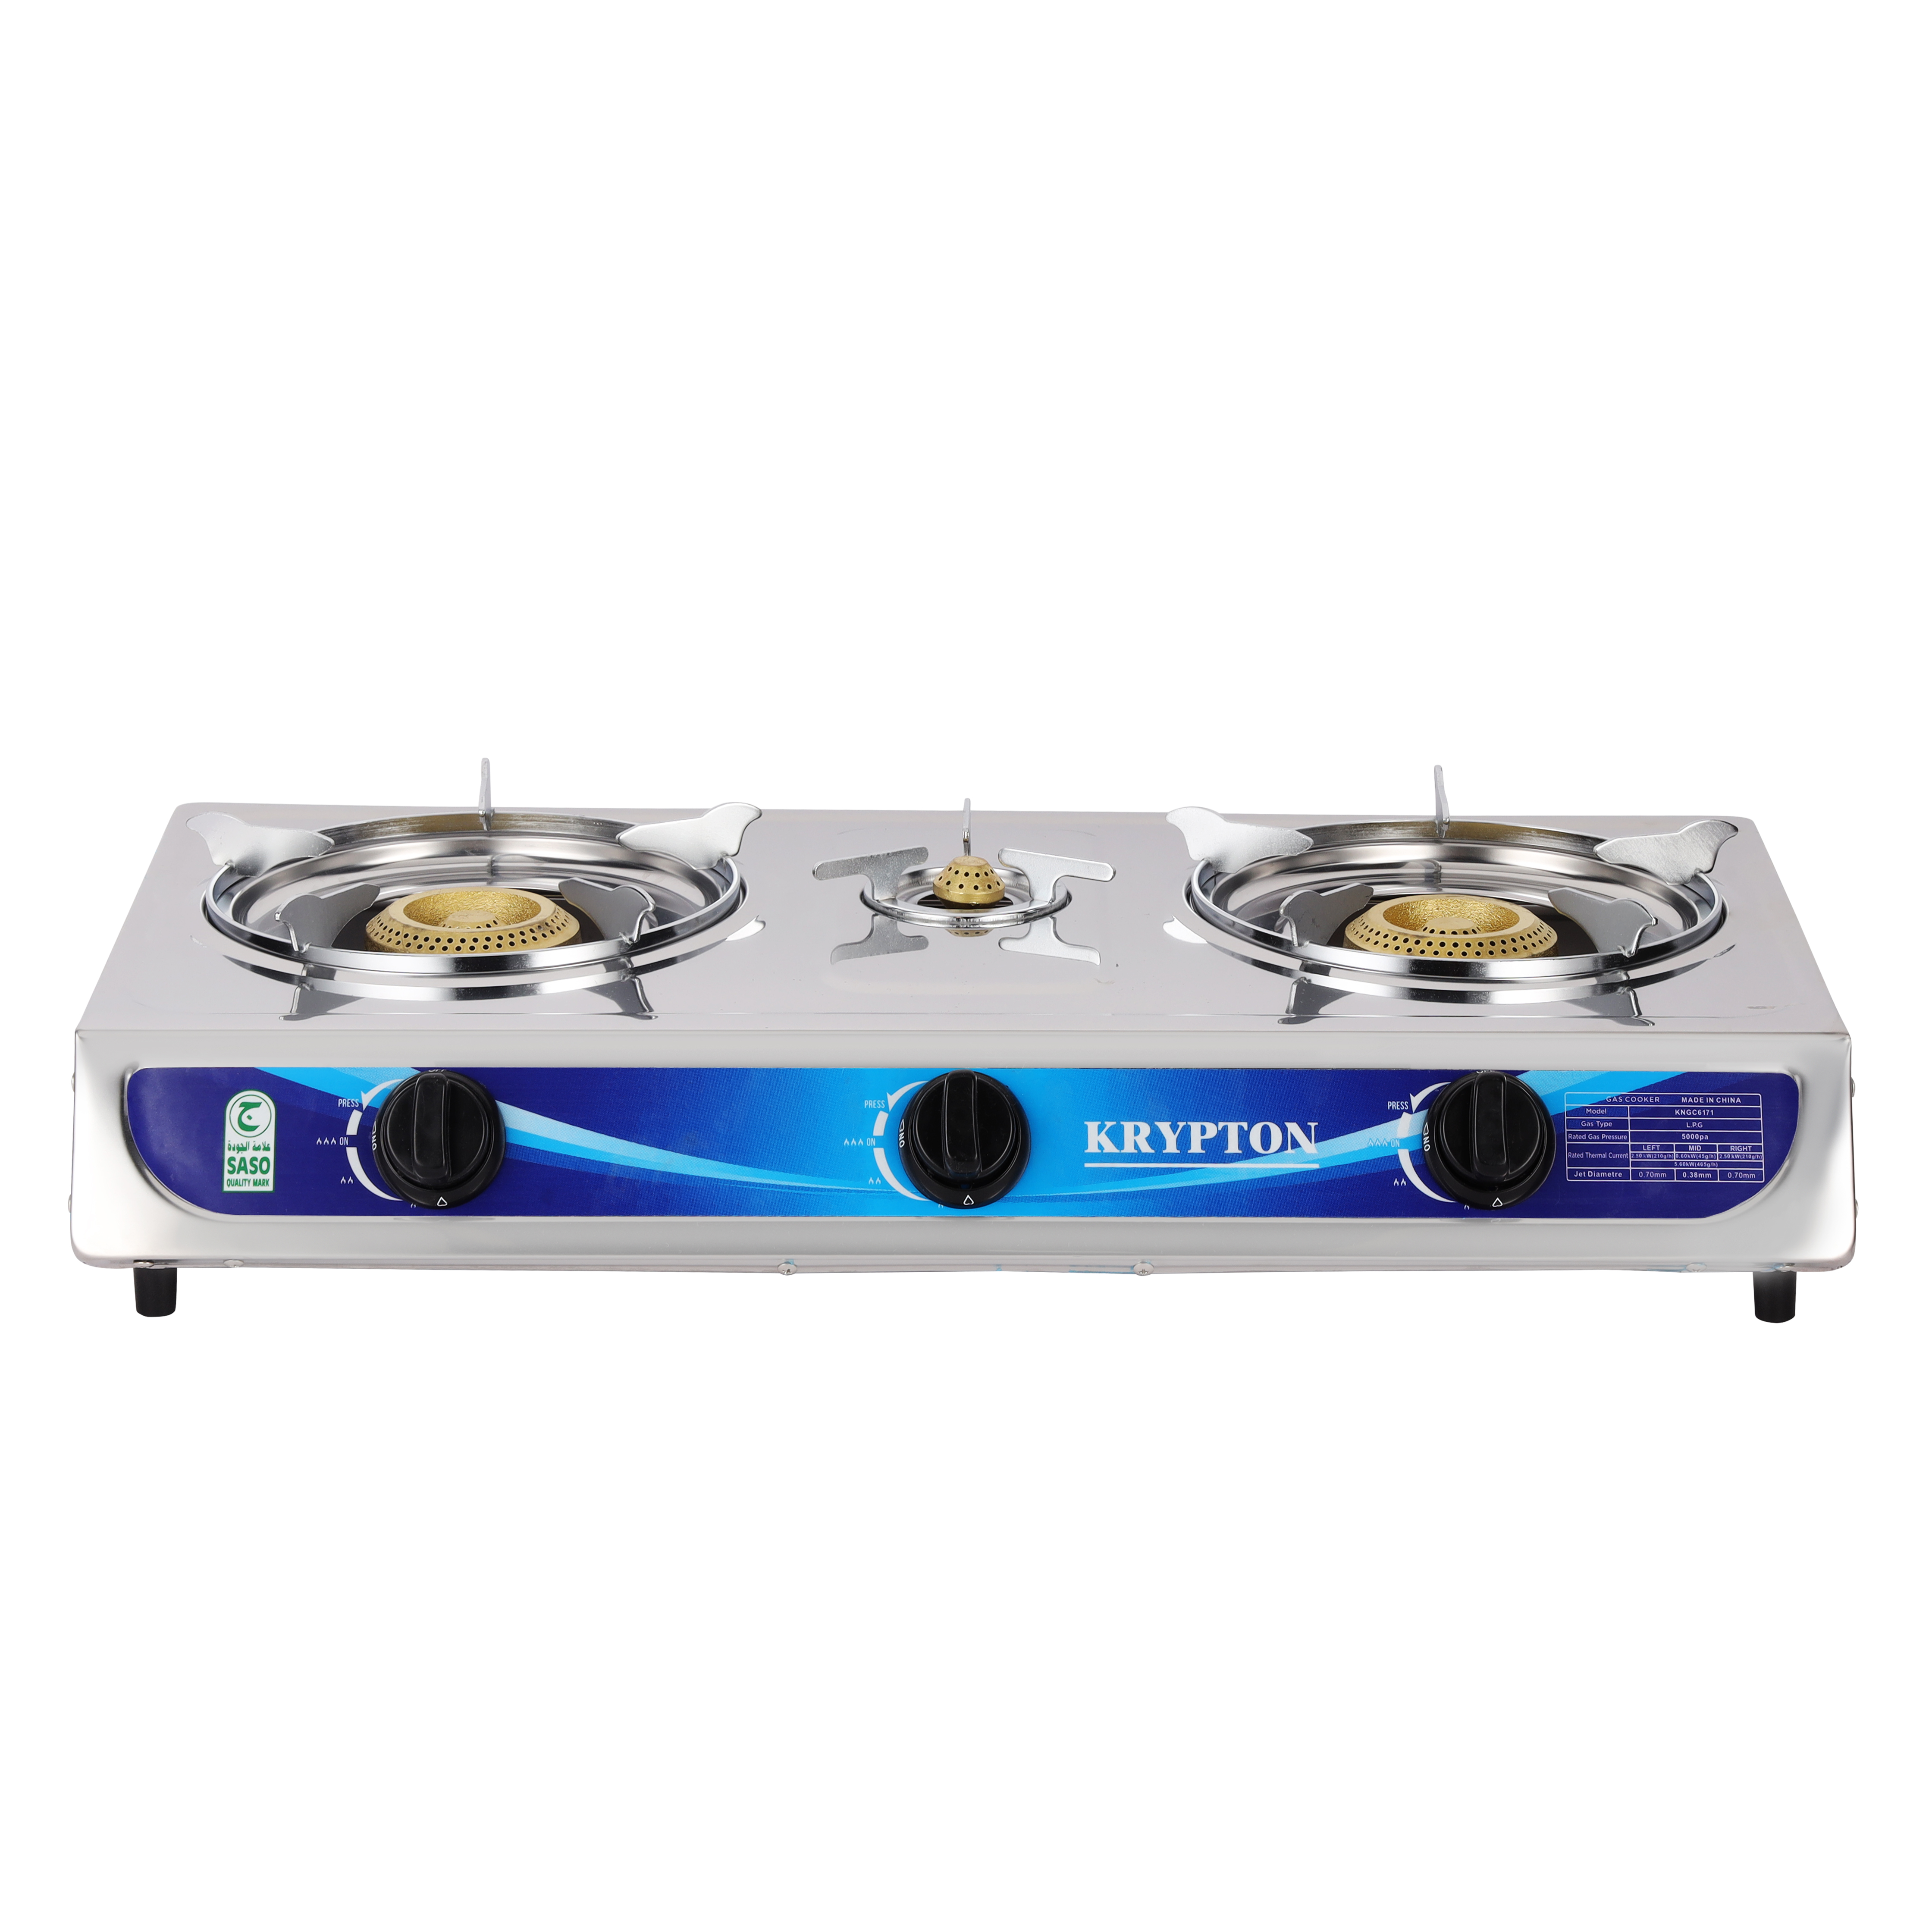 Krypton Stainless Steel Gas Cooker- KNGC6171| Triple Burner Gas Stove Low Gas Consumption LPG Gas Stove| Silver, 2 Years Warranty